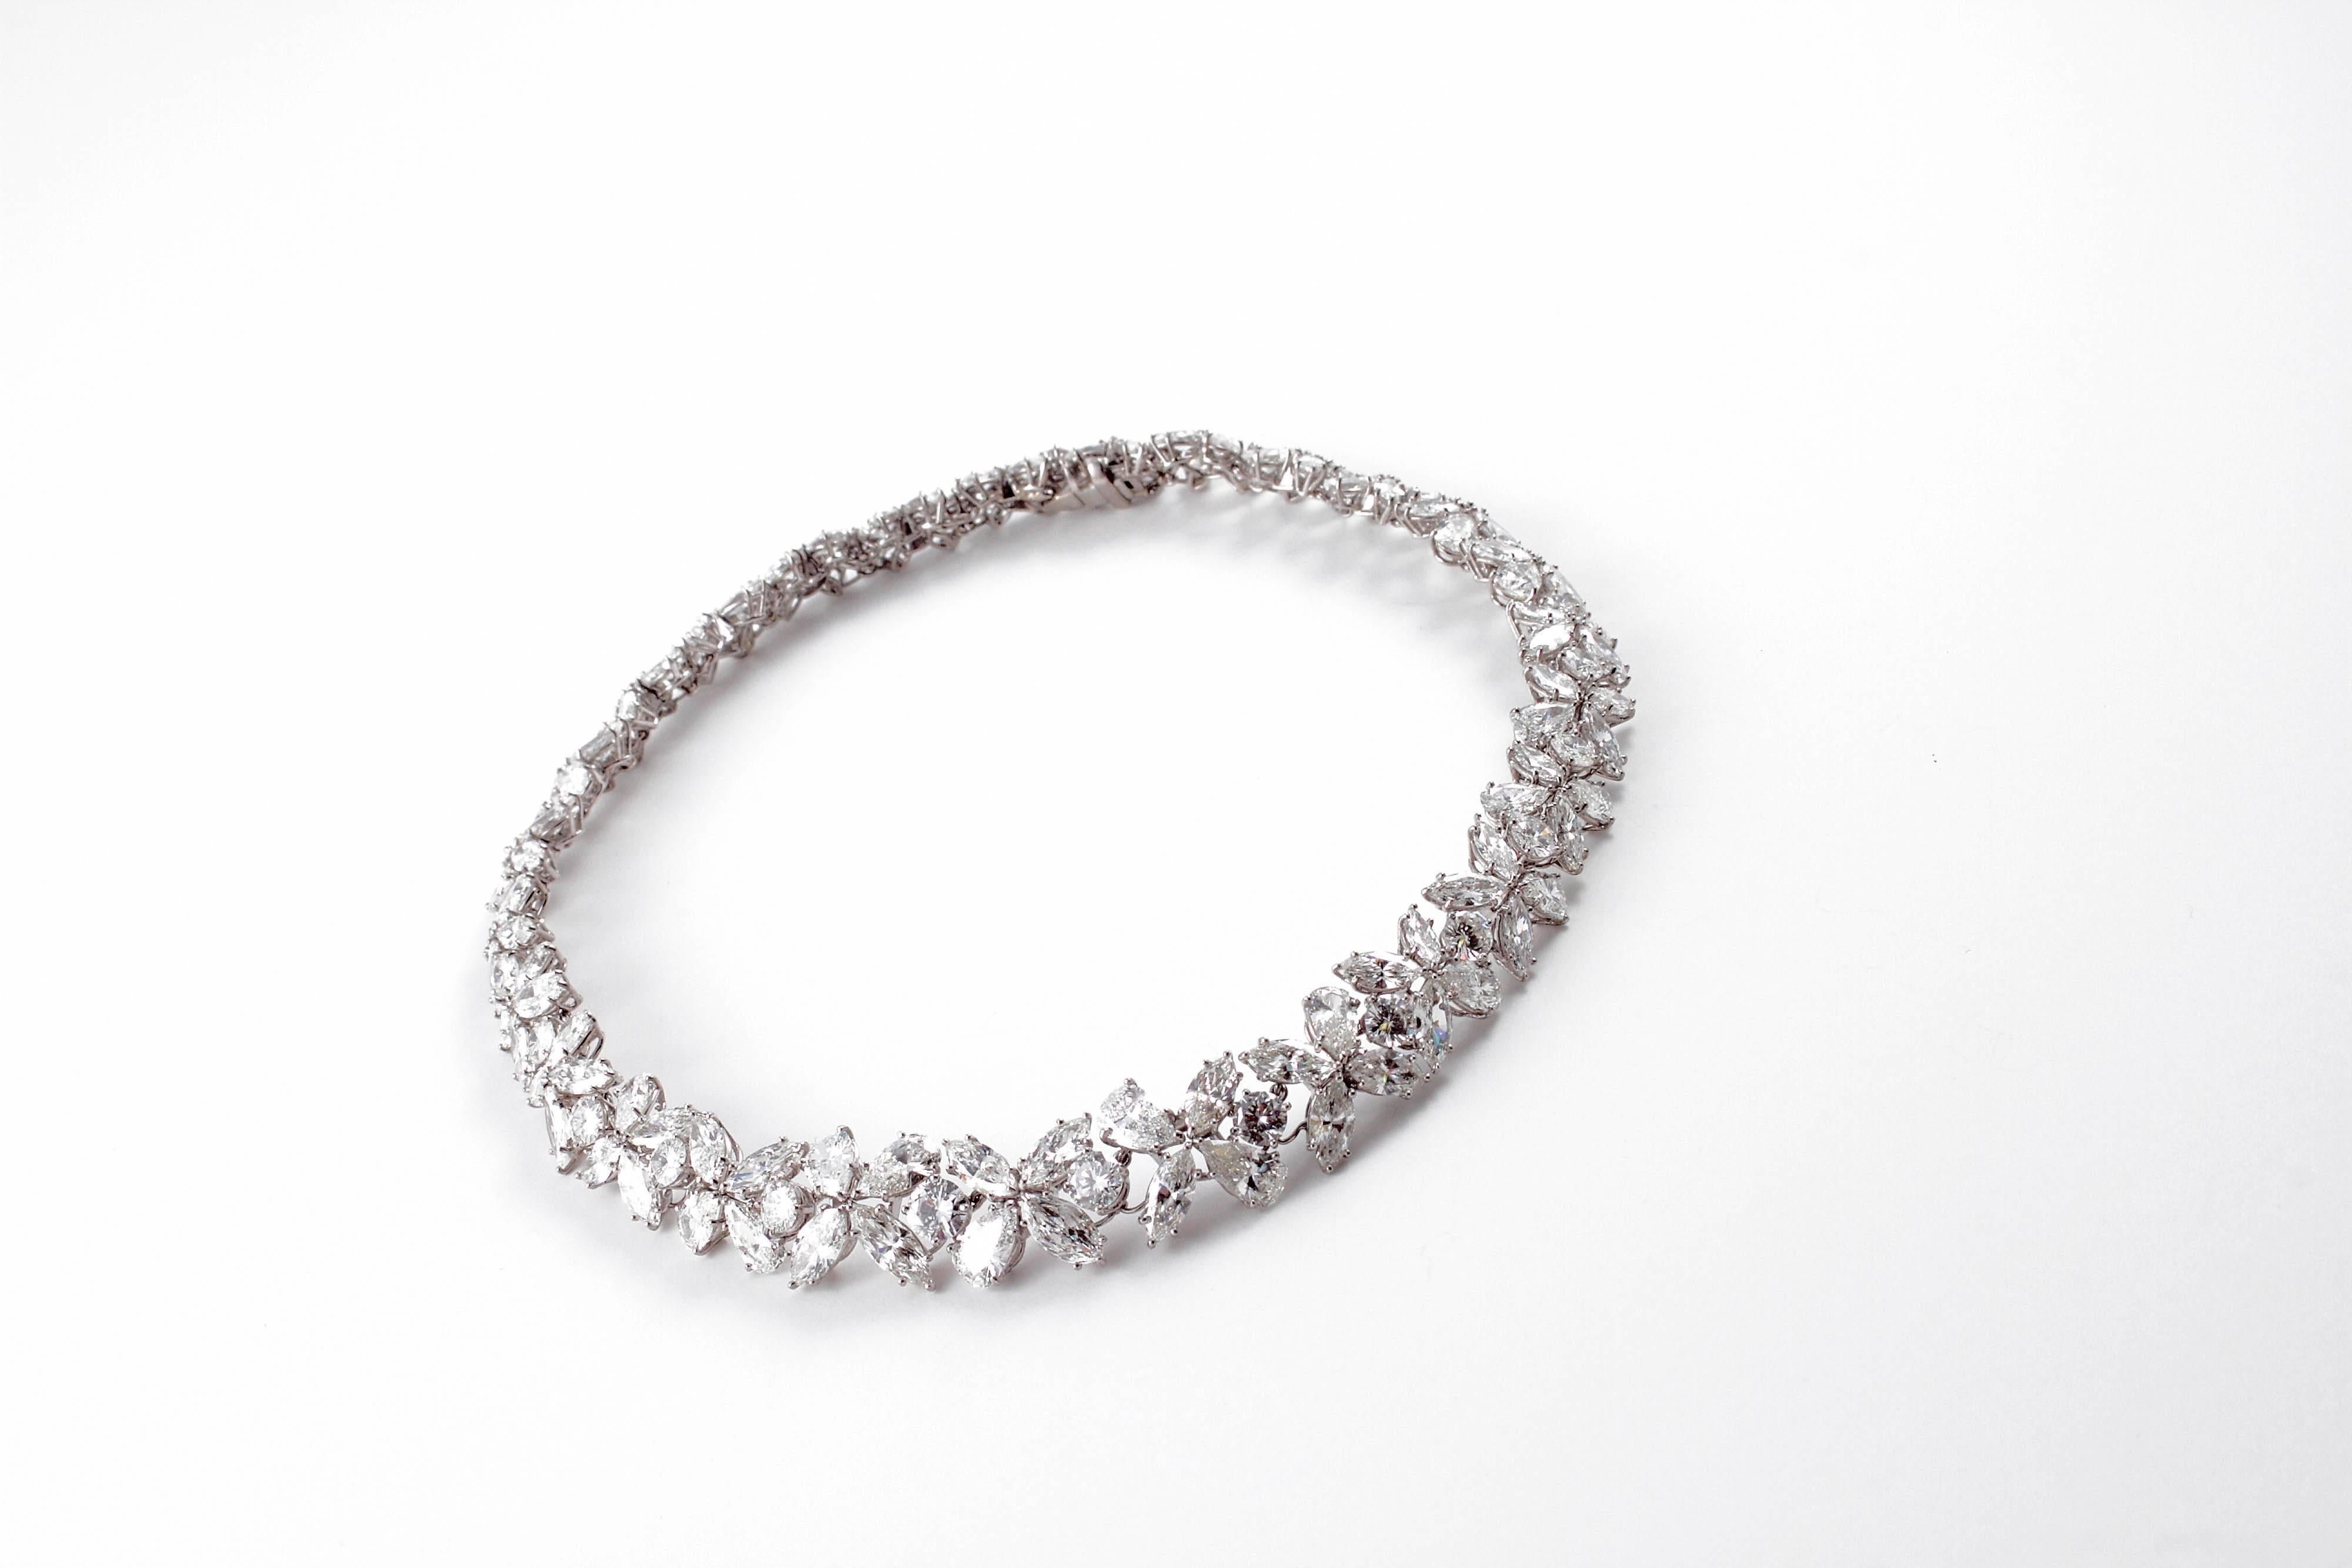 Composed of round, pear and marquise-shaped diamonds, in platinum, this incredible necklace is truly a work of art!  It measures approximately 15 inches in length.